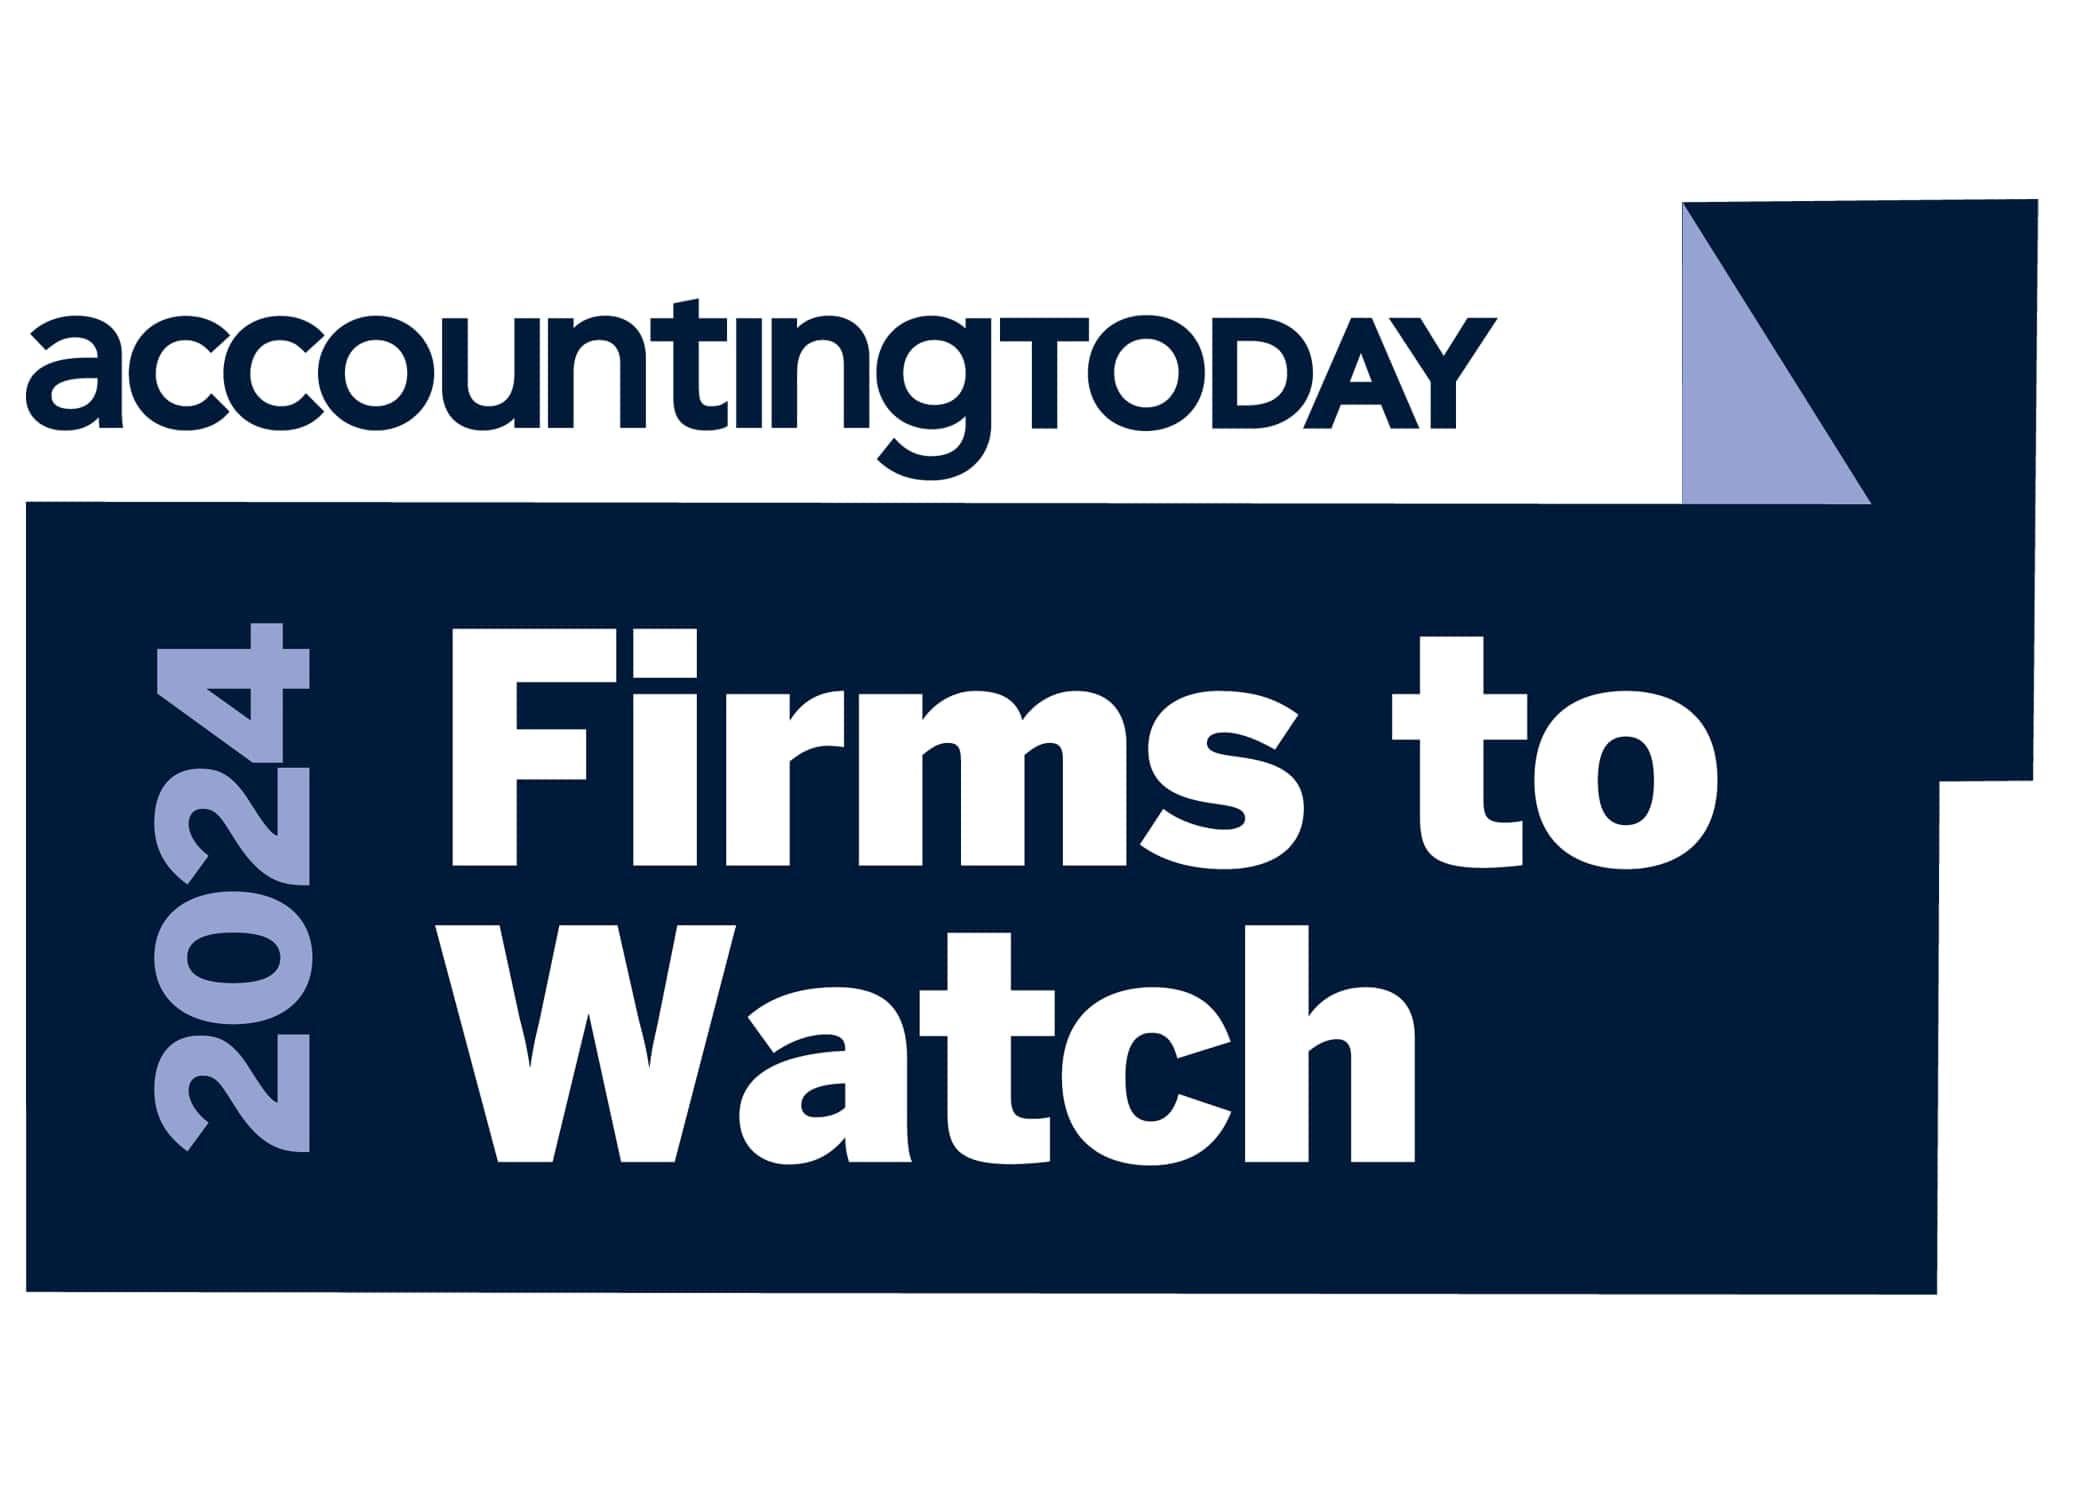 AT Firms to Watch